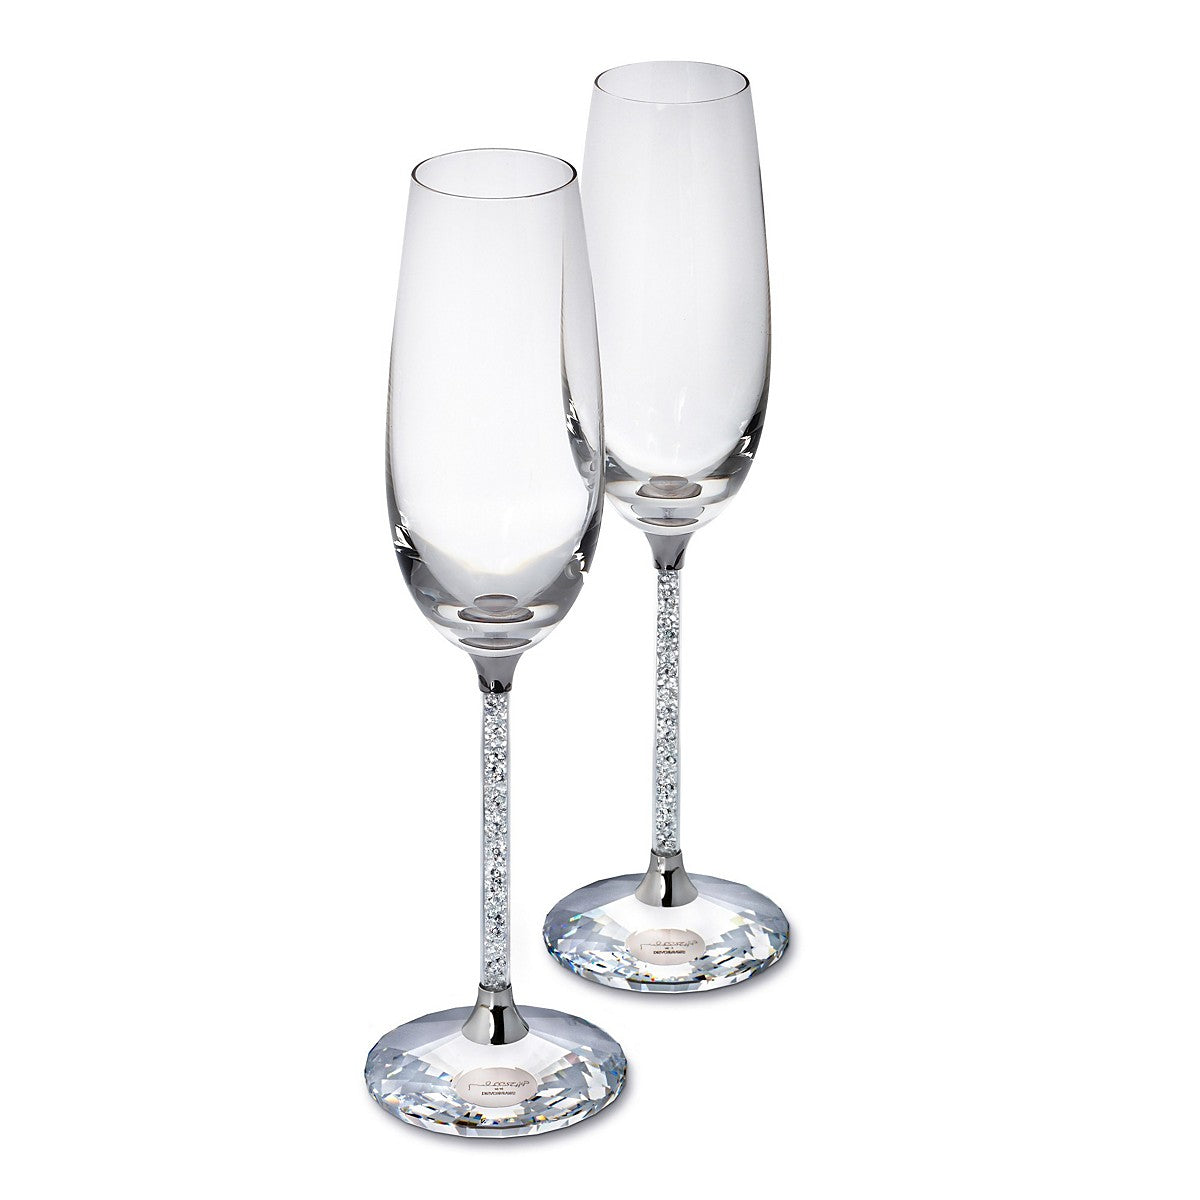 Elegant Glass Champagne Flutes with Crystalline Stems